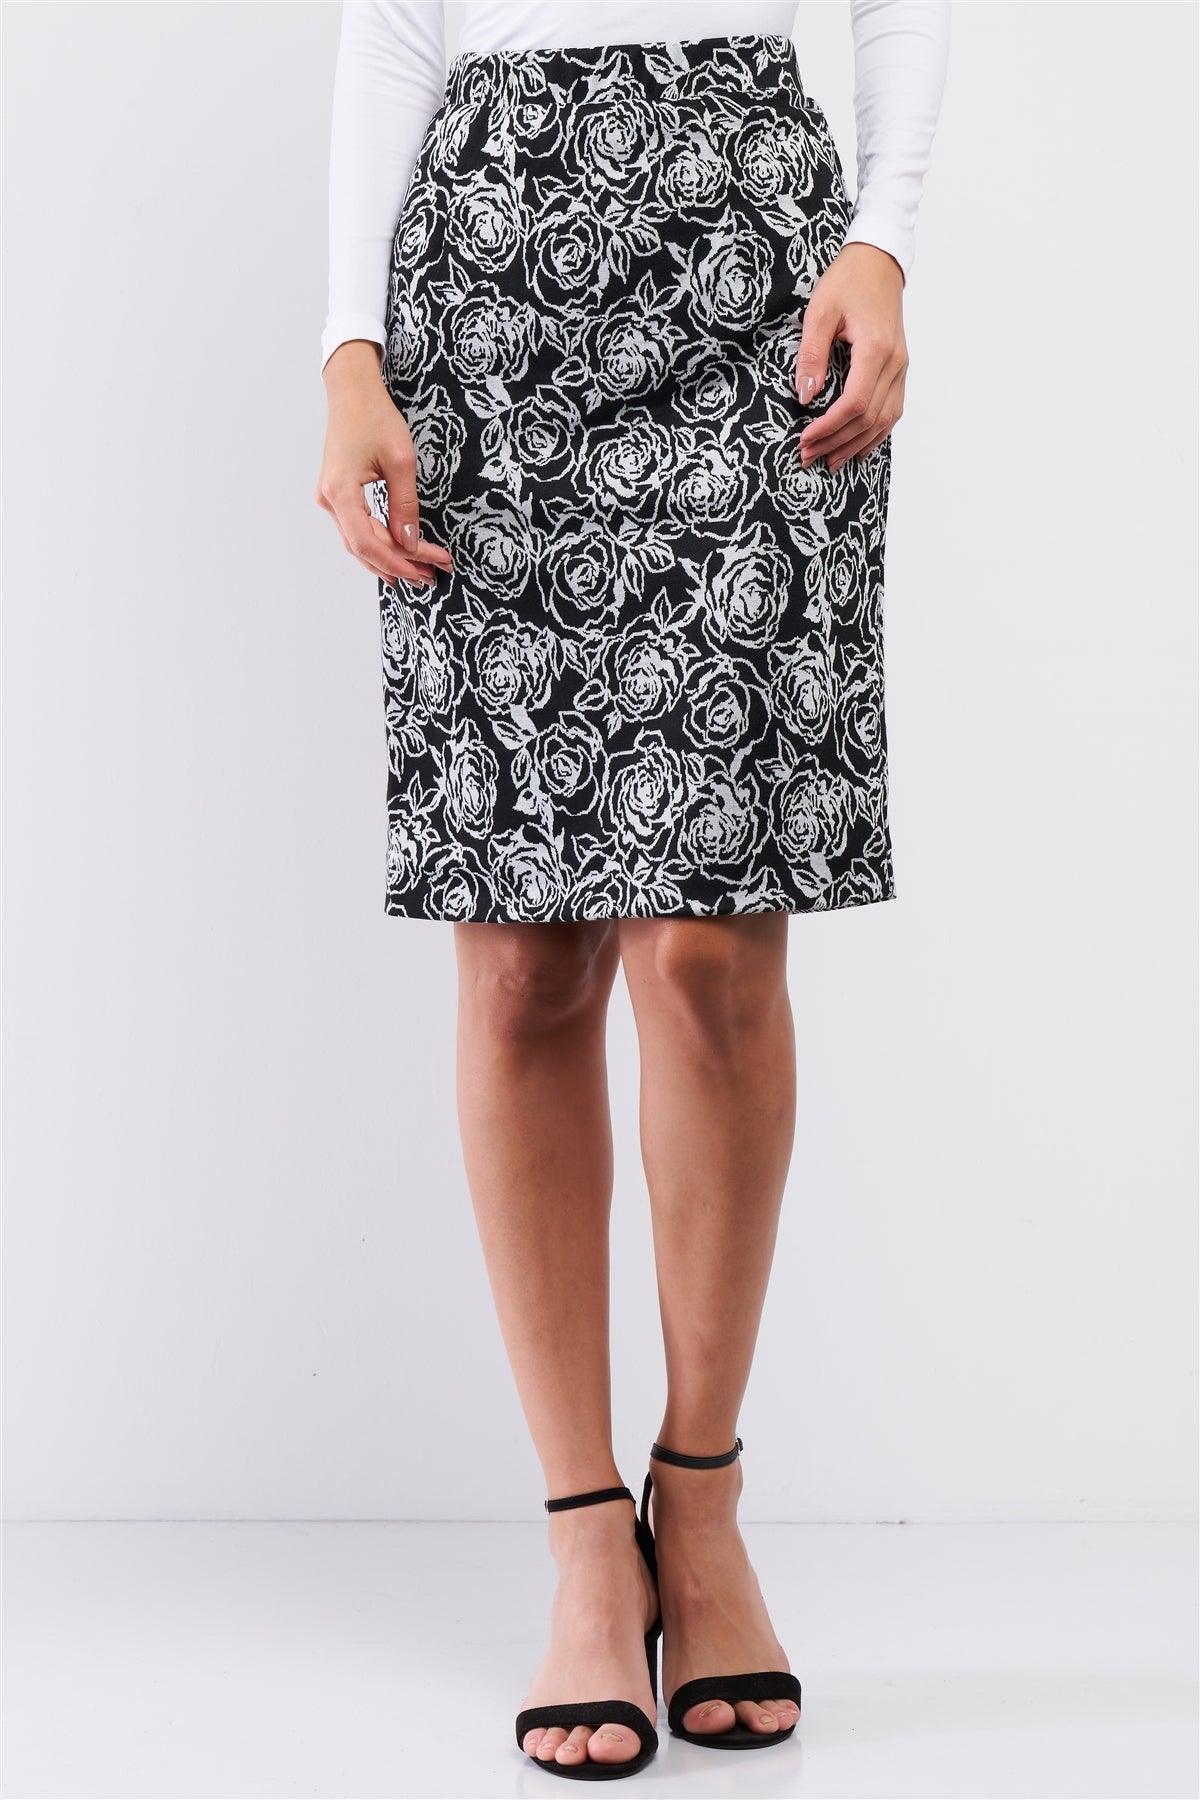 Black And White Rose Print High Waisted Pencil Skirt / 1-2-2-1